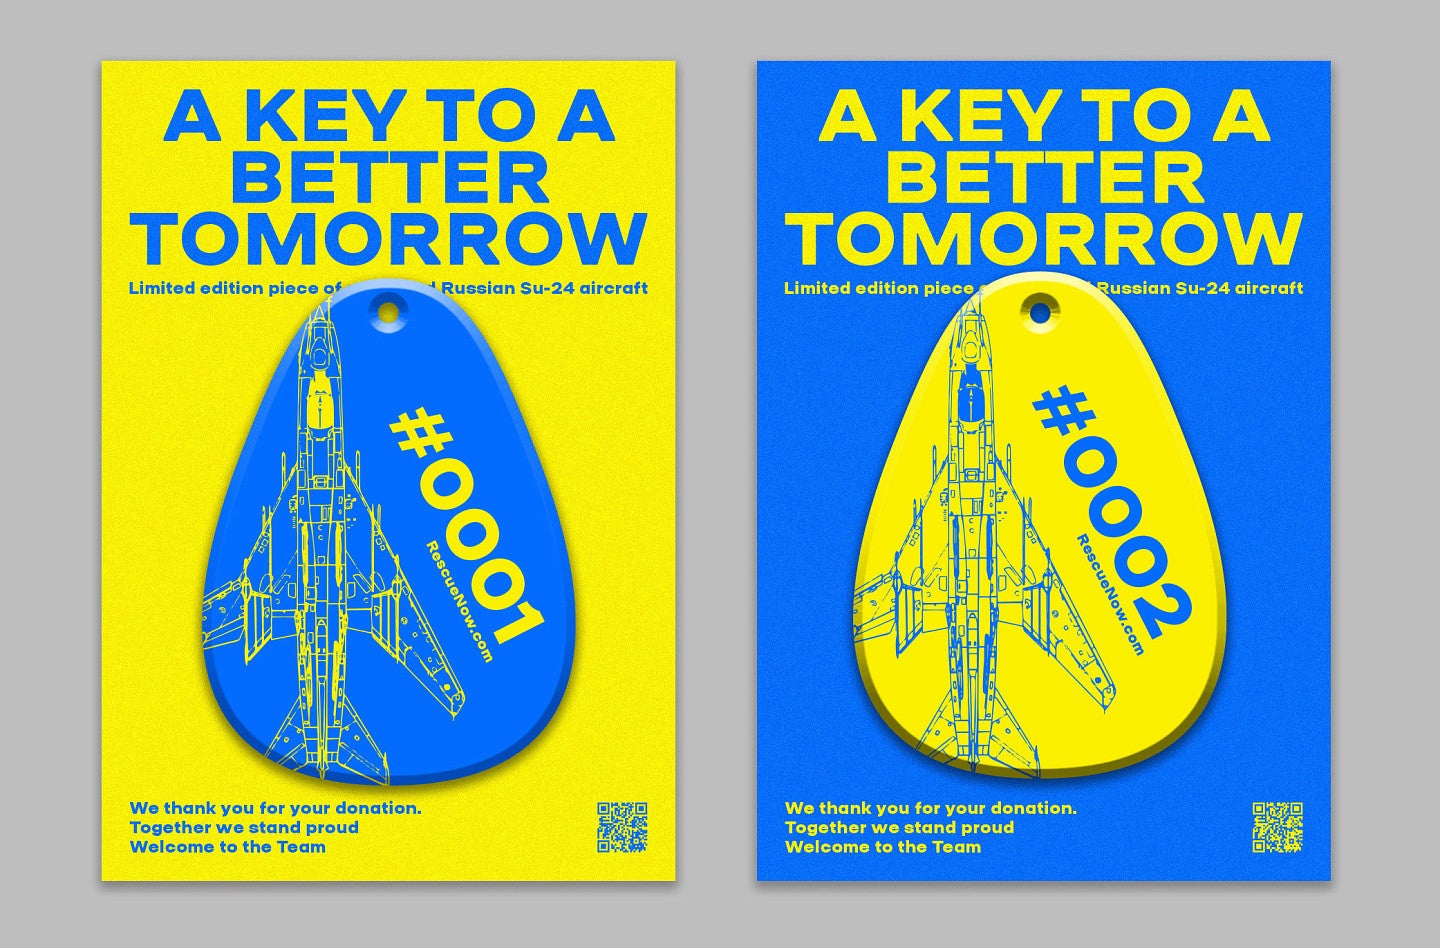 bright blue and yellow marketing collateral featuring the headline "A key to a better tomorrow"